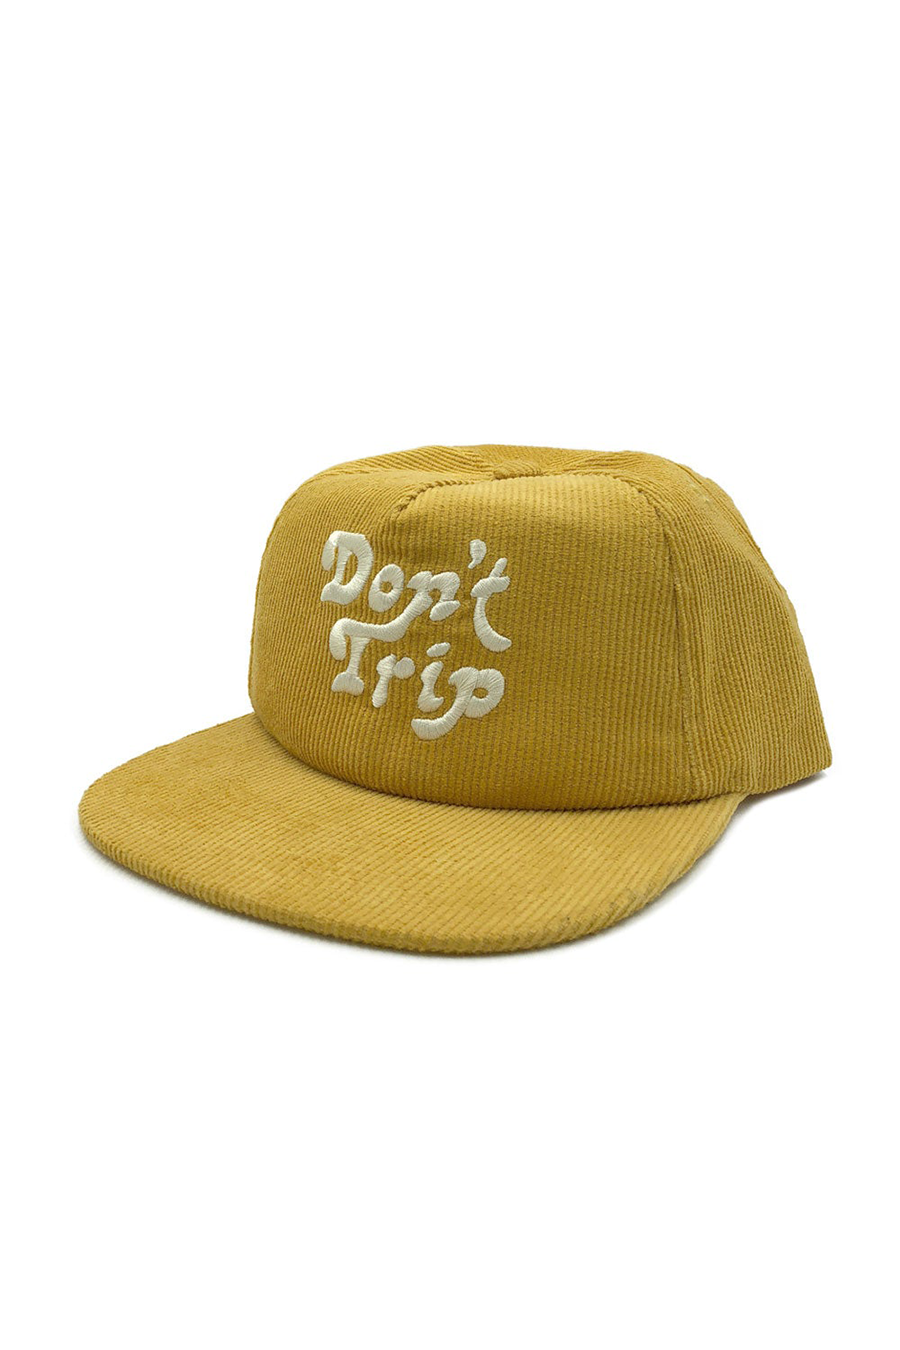 Don't Trip Corduroy Snapback Hat | Mustard - Main Image Number 1 of 1